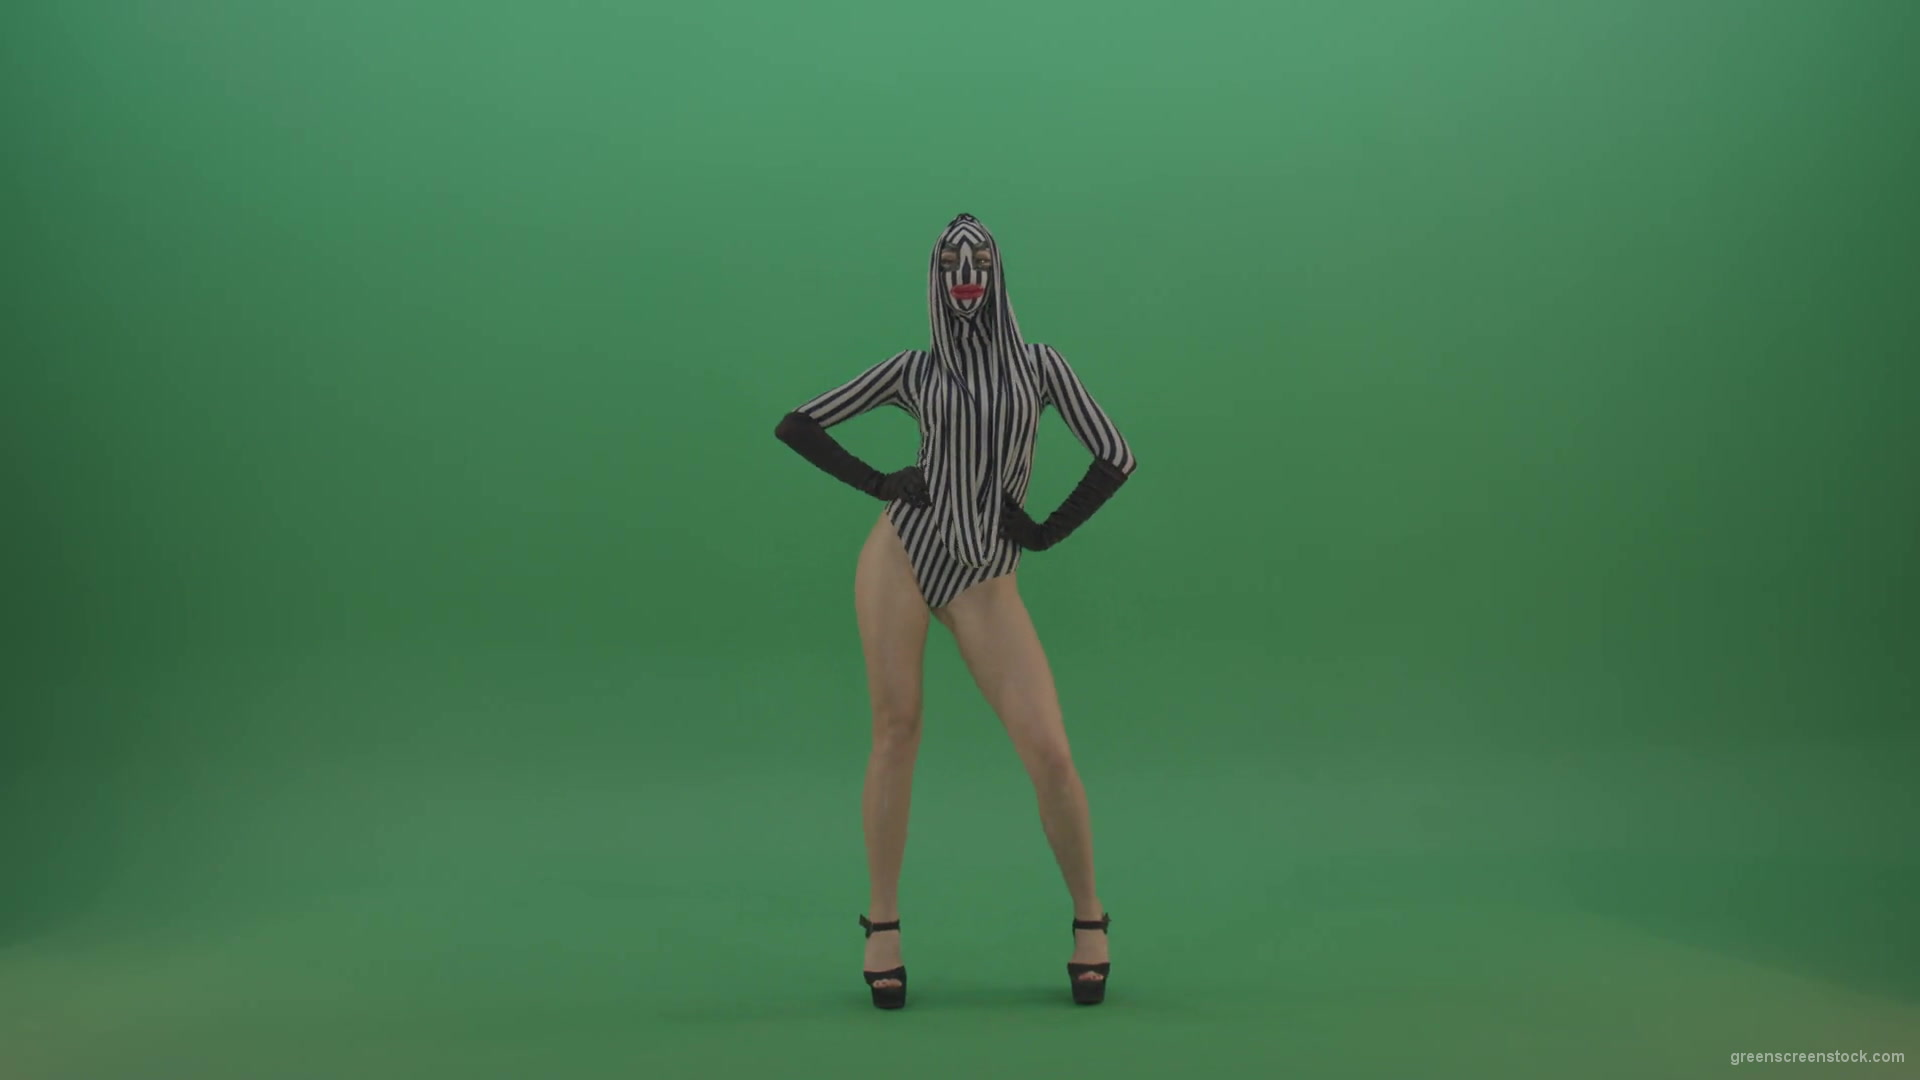 Ass-shake-beats-by-edm-go-go-girl-dance-isolated-on-green-screen-1920_007 Green Screen Stock